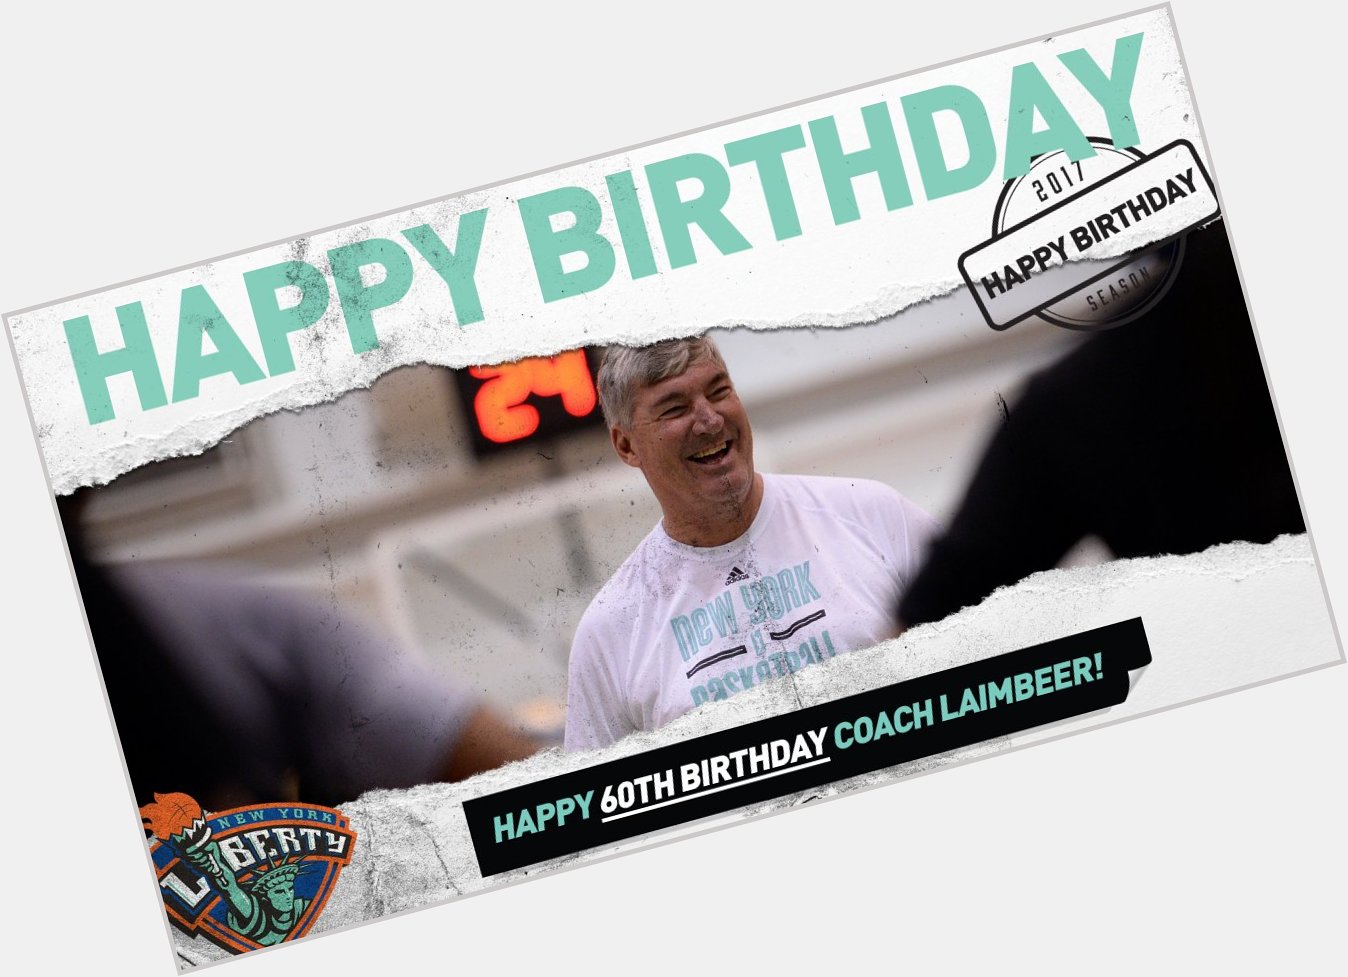 Join the Liberty in wishing a happy 60TH! birthday to head coach Bill Laimbeer! 